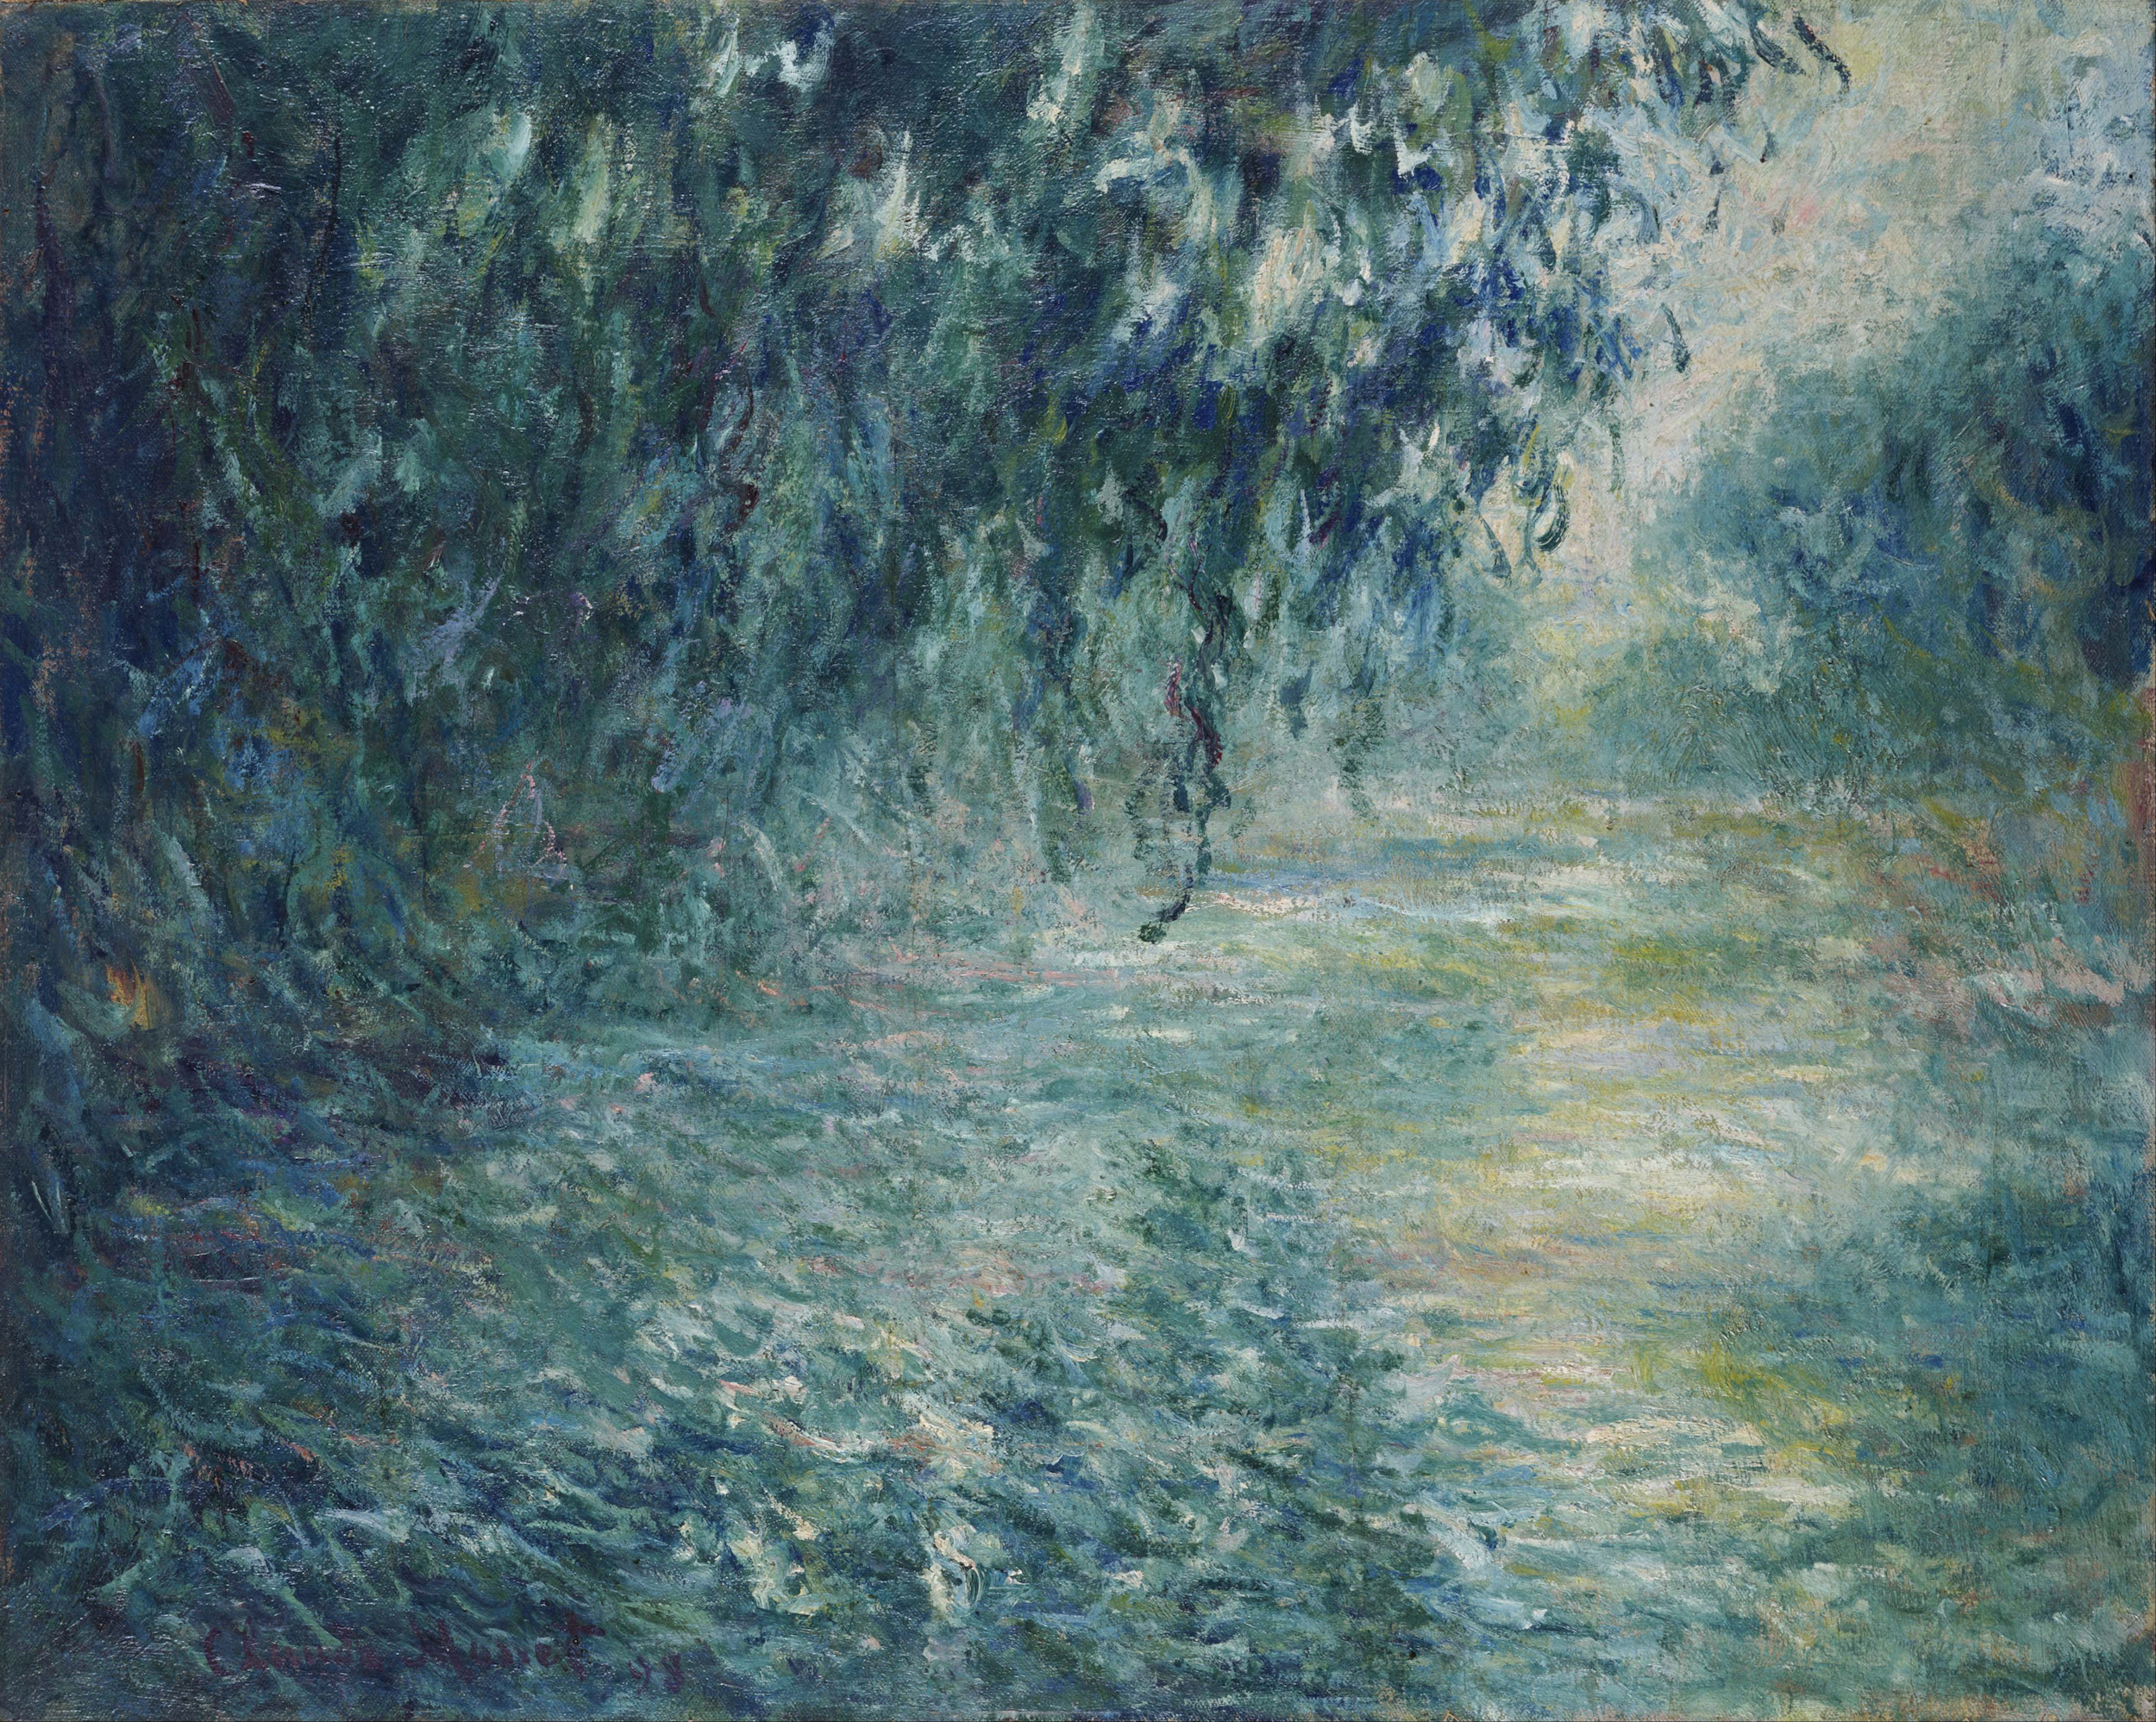 Morning on the Seine by Claude Monet - 1898 - 91.5 x 73 cm The National Museum of Western Art, Tokyo